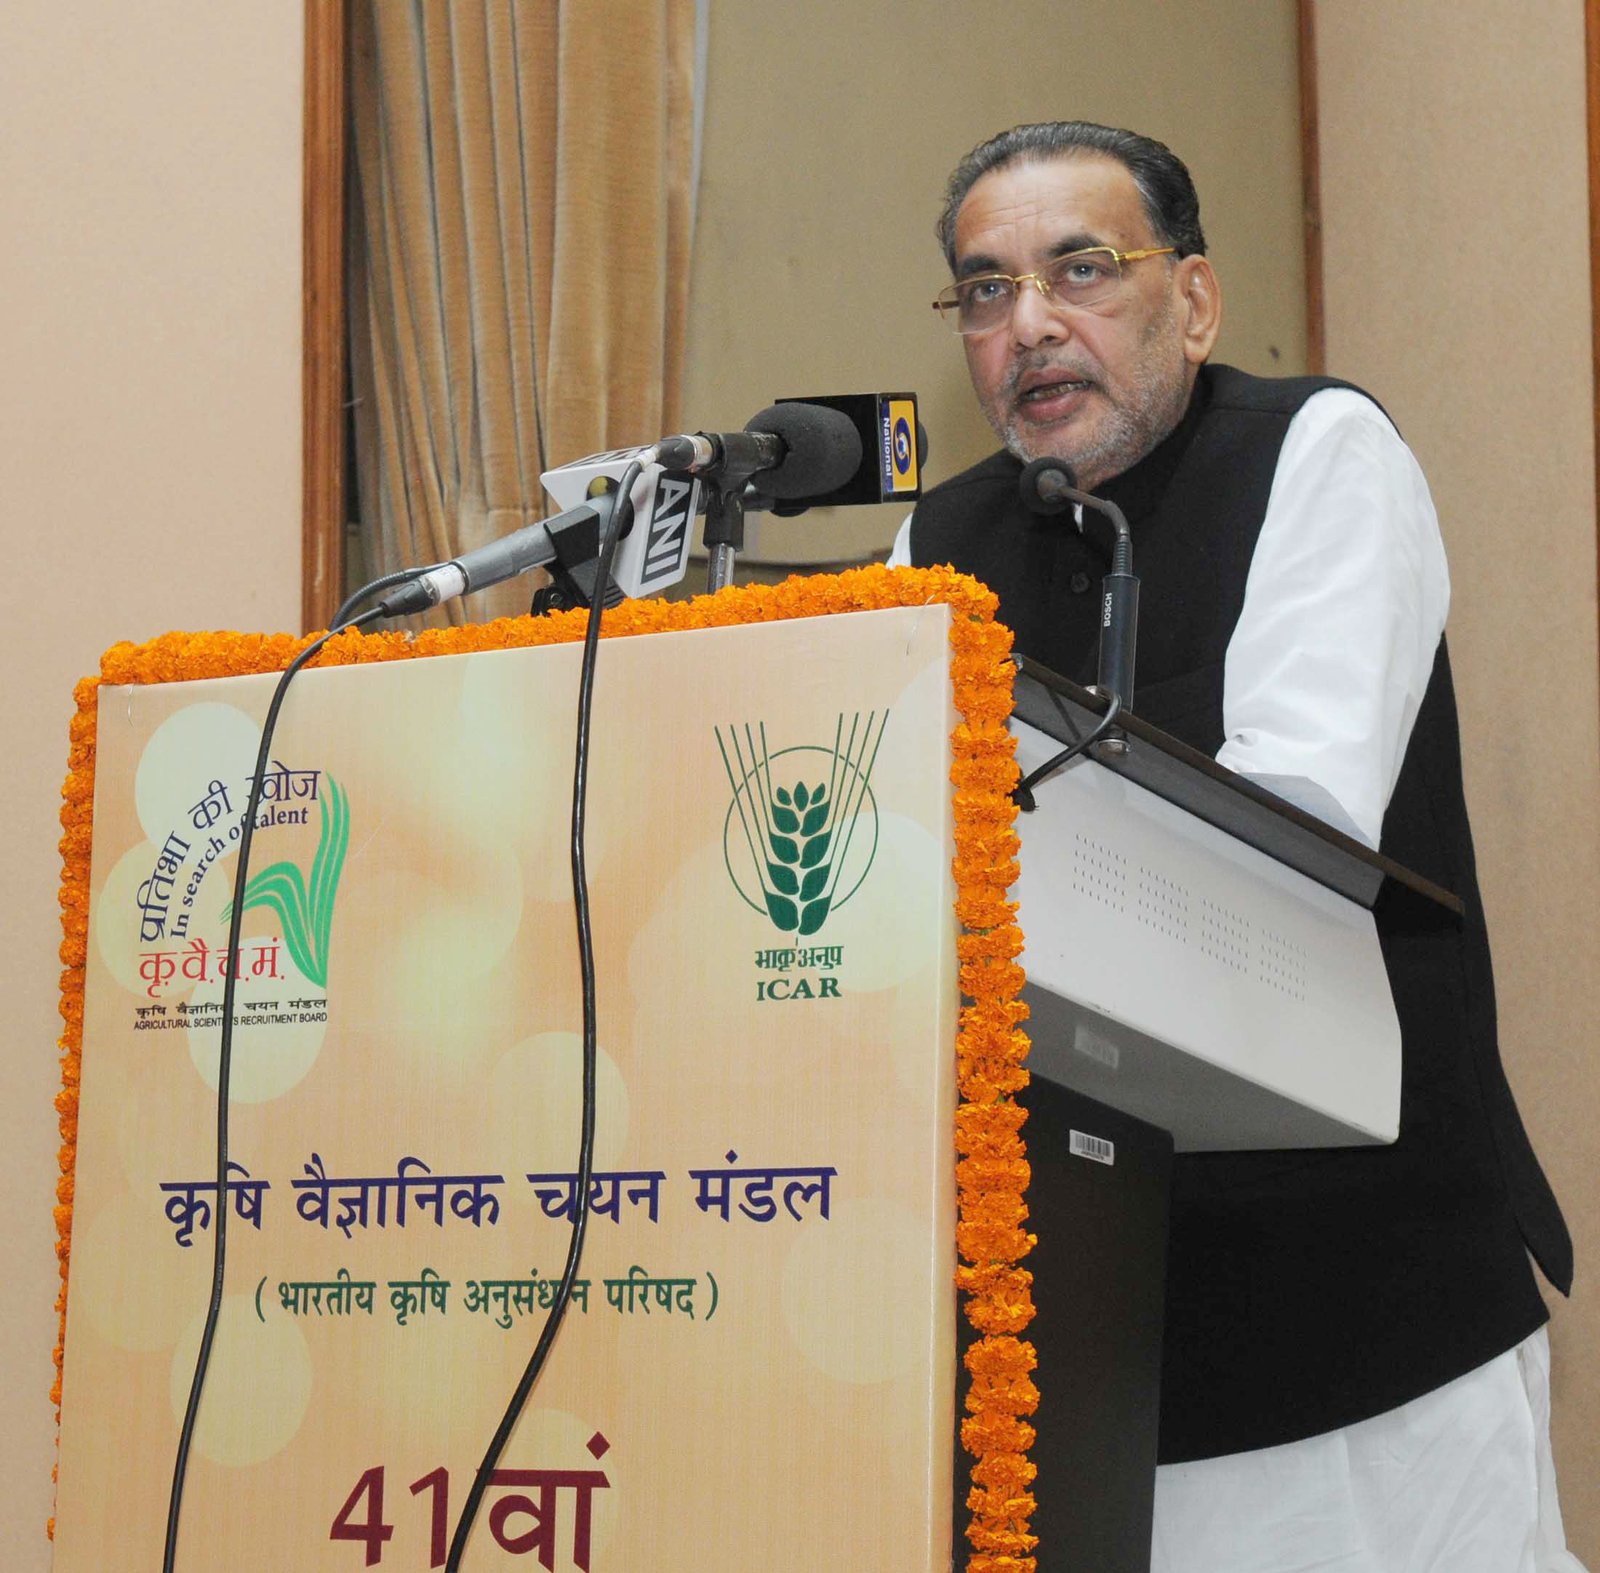 Agriculture minister, Mr Radha Mohan Singh addressing at the 41st foundation day of Agricultural Scientists Recruitment Board, in New Delhi on November 01, 2014.